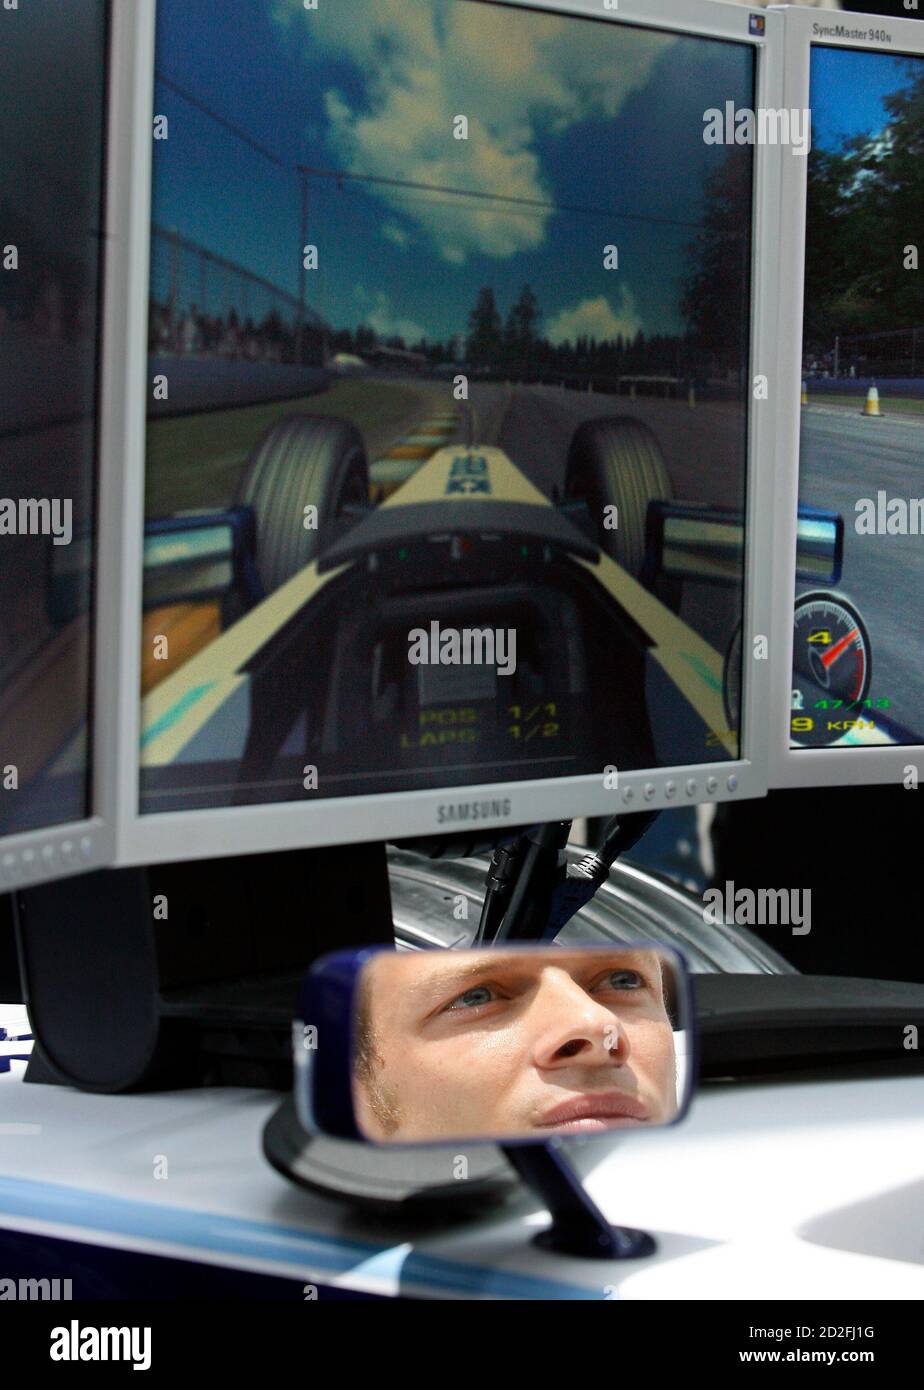 Williams Formula One (F1) driver Alex Wurz of Austria uses a F1 simulator in a model of a full-size Williams car during the Grand Prix Challenge in Singapore April 4, 2007.  Singapore is the second city in the world to hose the Grand Prix Challenge, in which members of the public compete on a simulator to attain the best lap times on a simulated circuit. Three top participants from Singapore competed against Williams F1 drivers Narain Karthikeyan and Wurz during the grand finals on Wednesday.  REUTERS/Nicky Loh (SINGAPORE) Stock Photo